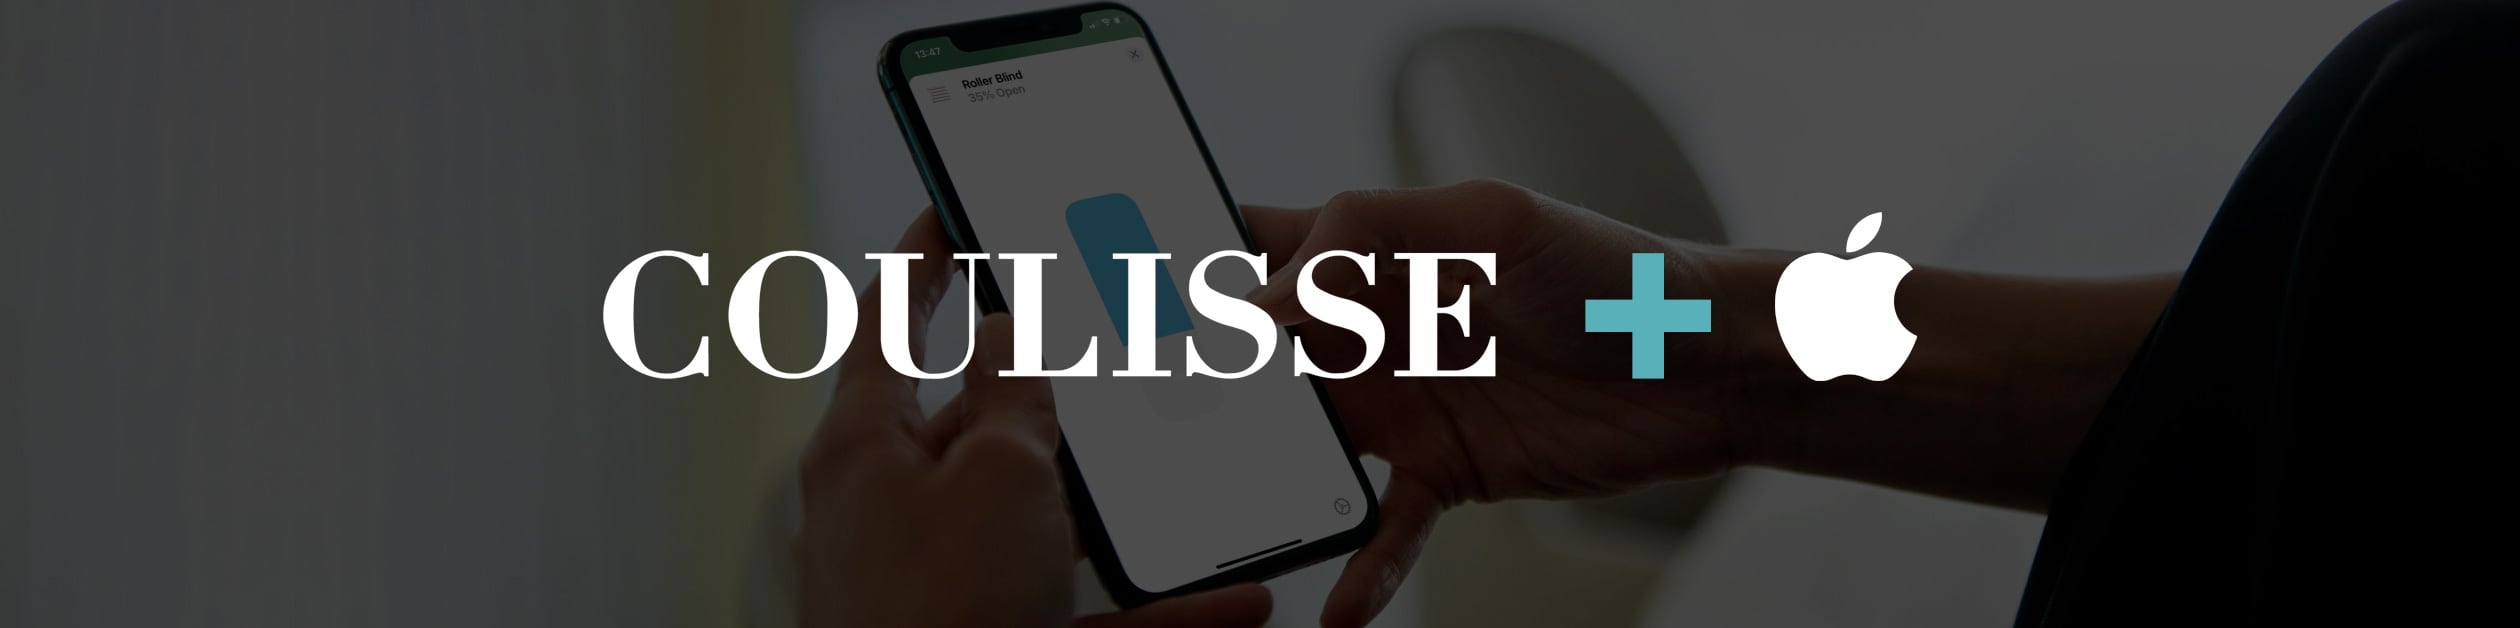 Coulisse Announces Apple HomeKit Support